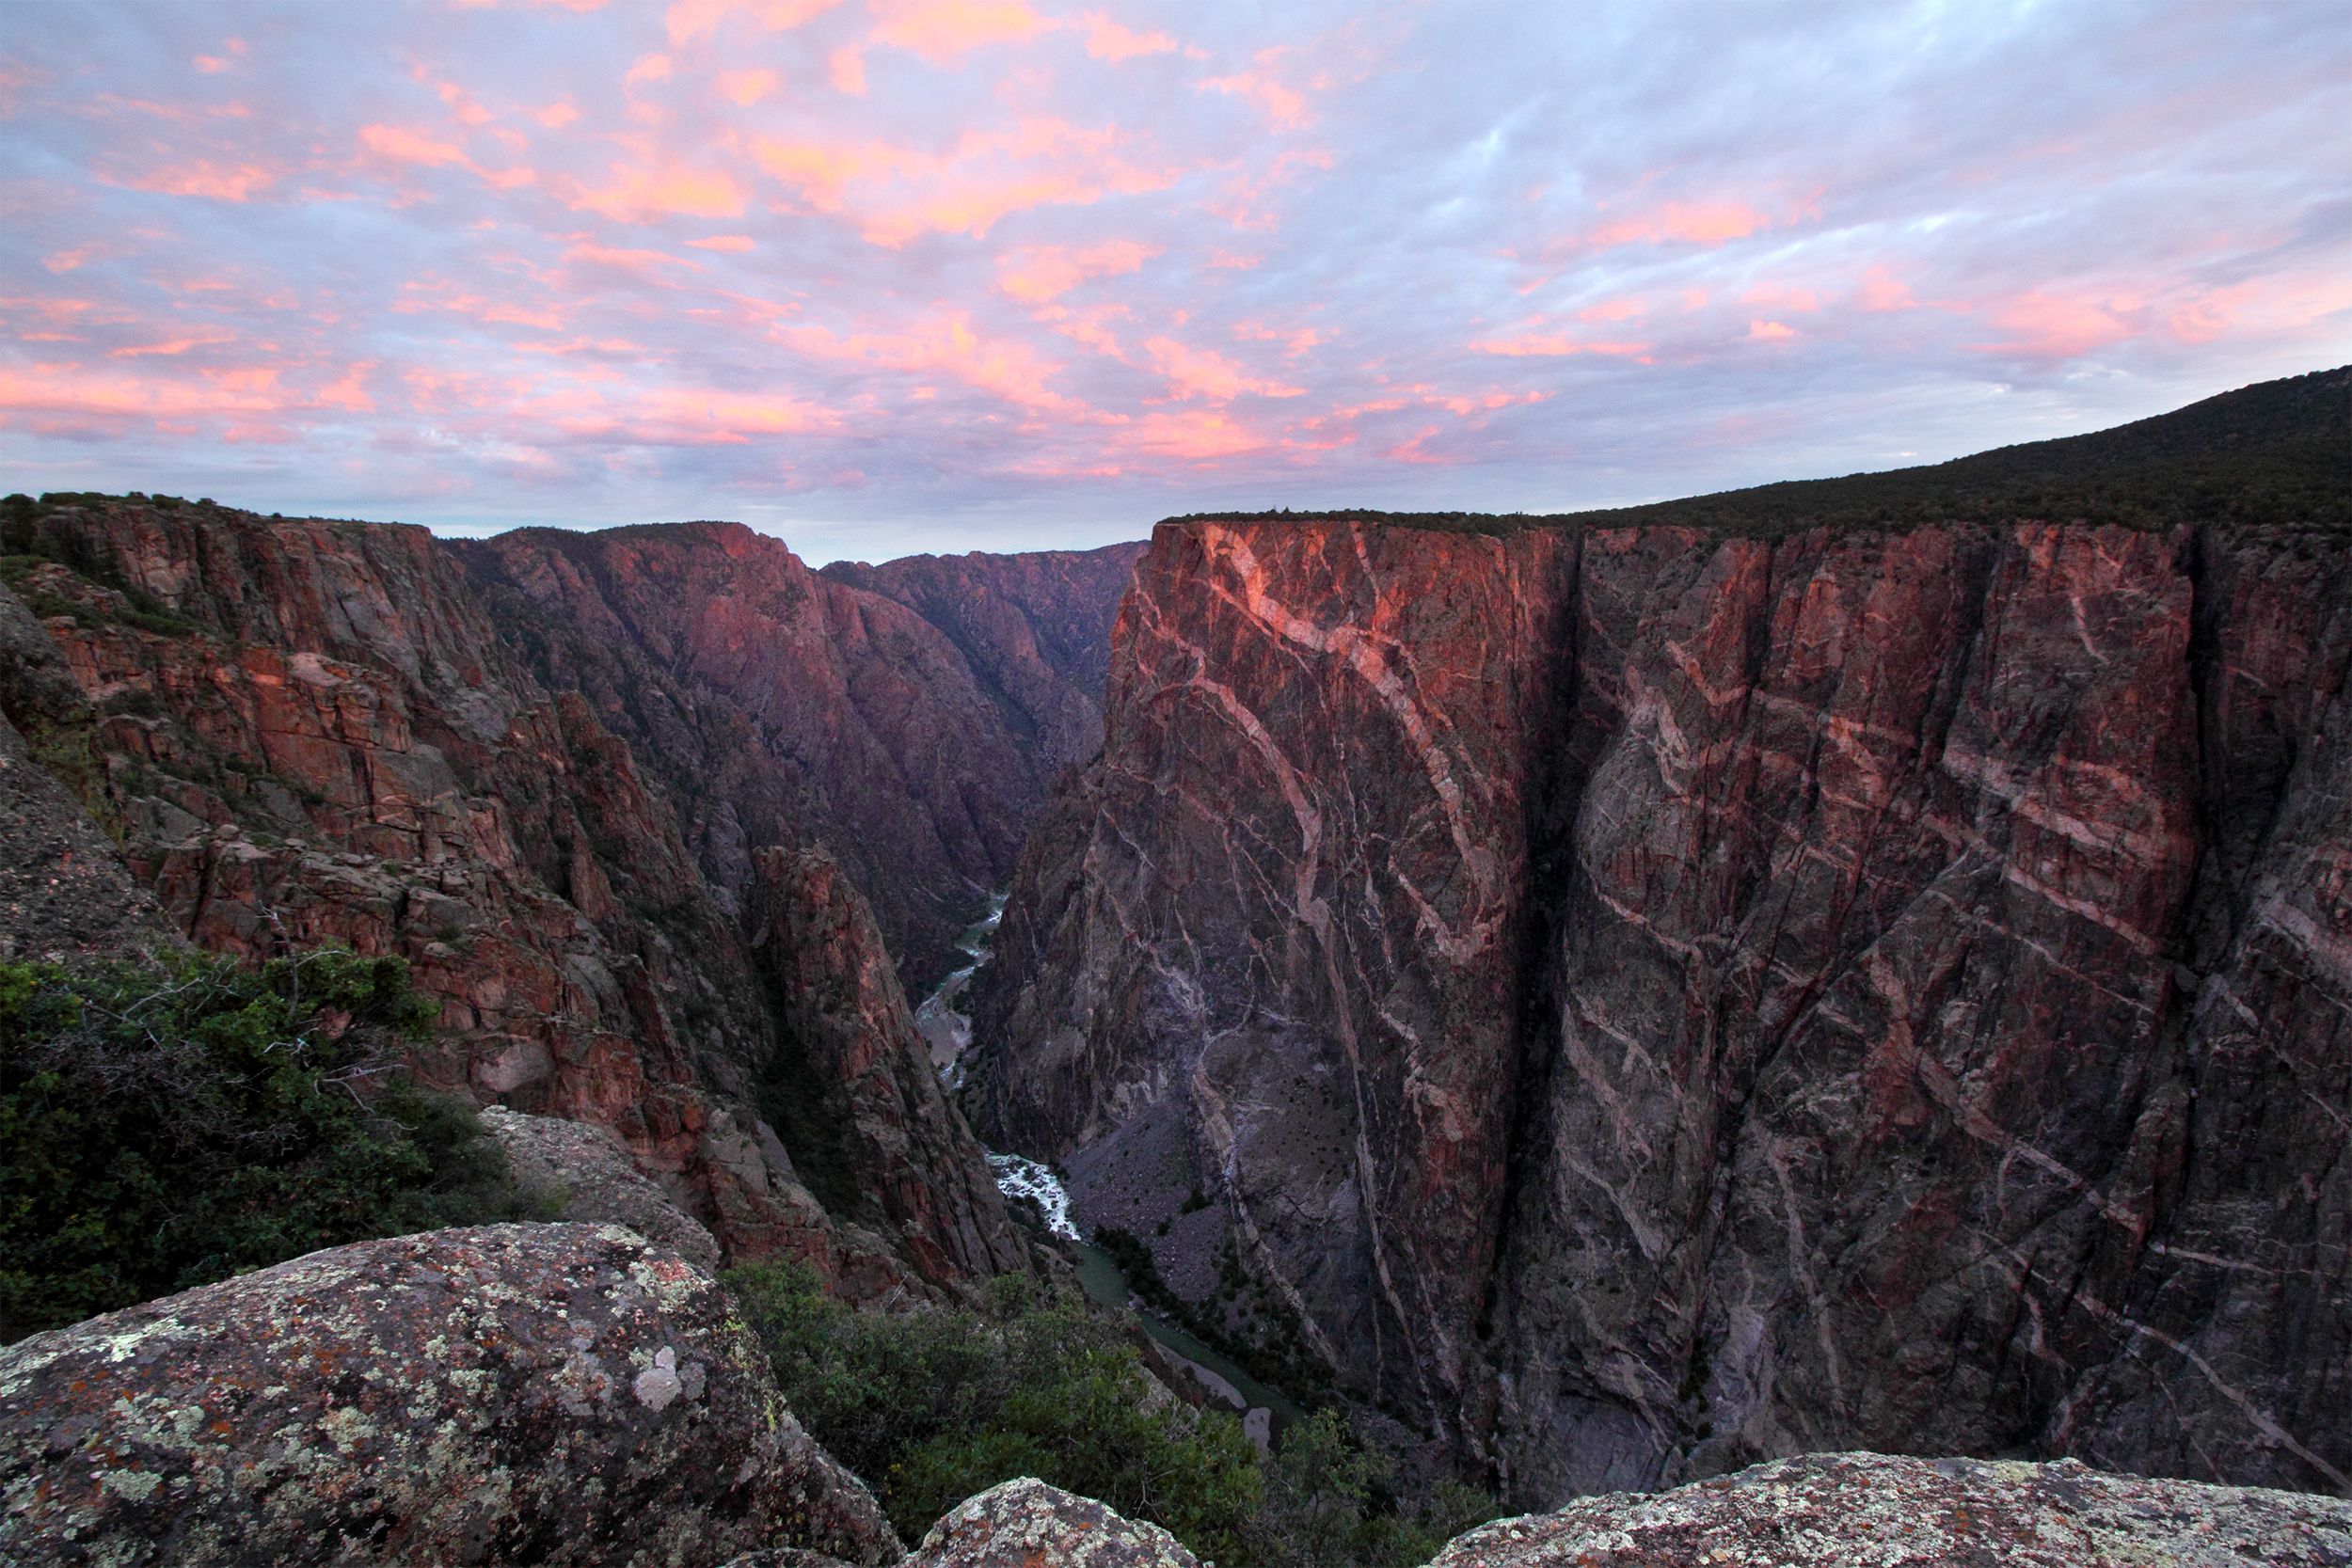 <p>Get ready for steep cliffs and craggy spires at <a href="https://www.nps.gov/blca/index.htm">Black Canyon of the Gunnison National Park</a>. A vertical rock wilderness, the canyon offers a place for visitors to hike, take scenic drives, rock climb, and go kayaking. Night sky viewing opportunities are also popular here. </p><p><b>Related:</b> <a href="https://blog.cheapism.com/national-park-photos-snow/">Awe-Inspiring Photos of National Parks in Winter</a></p>